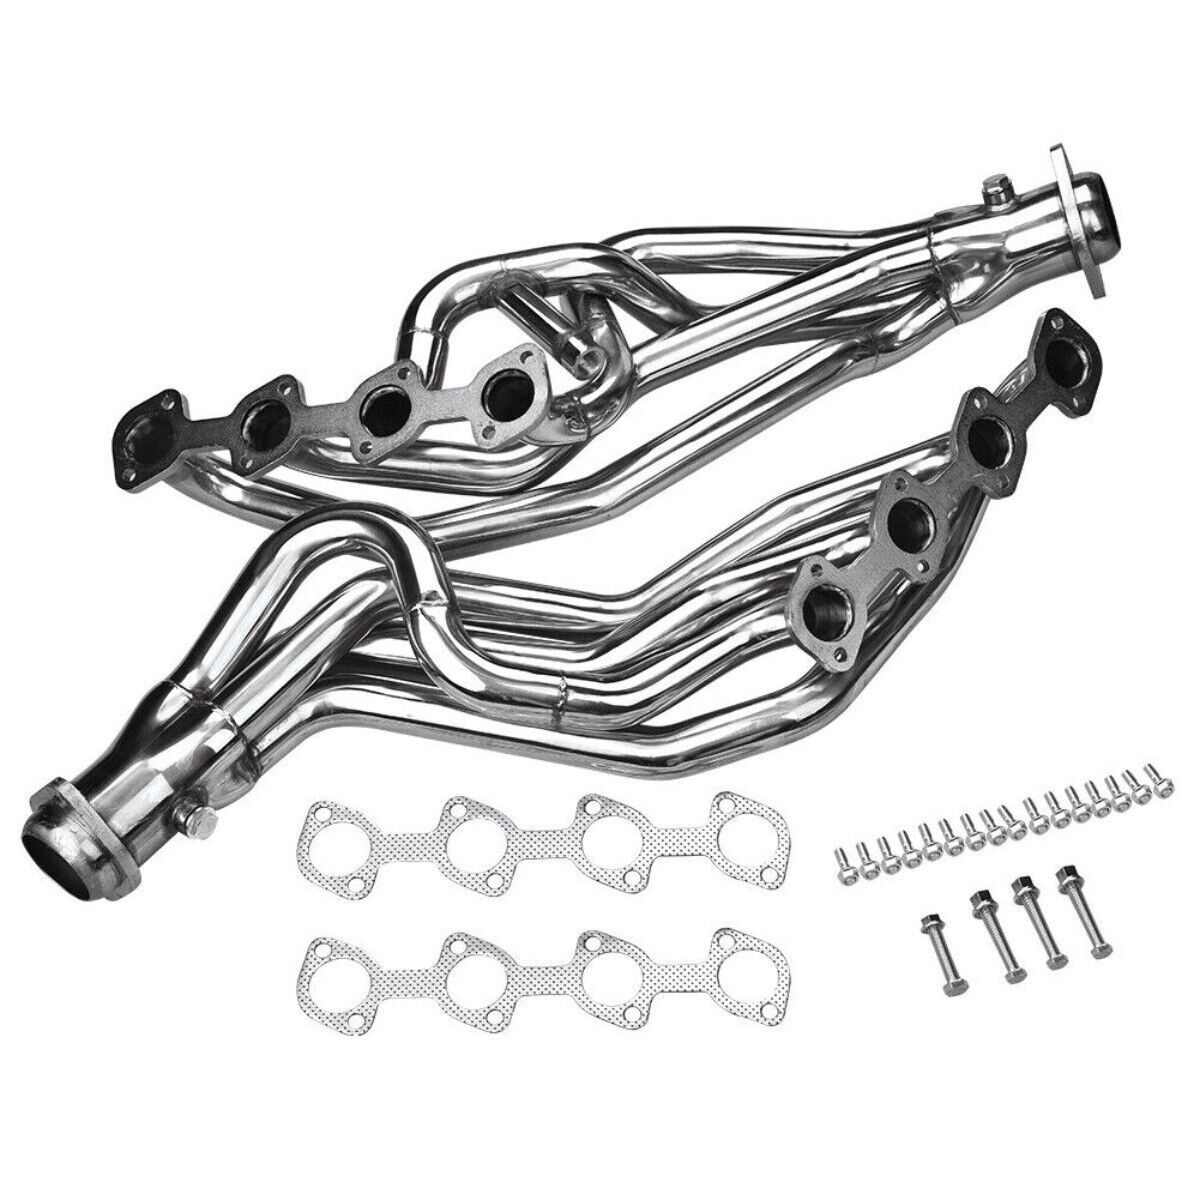 For 1996-2004 Mustang GT 4.6L V8 Stainless Long Tube Polished Header/Exhaust